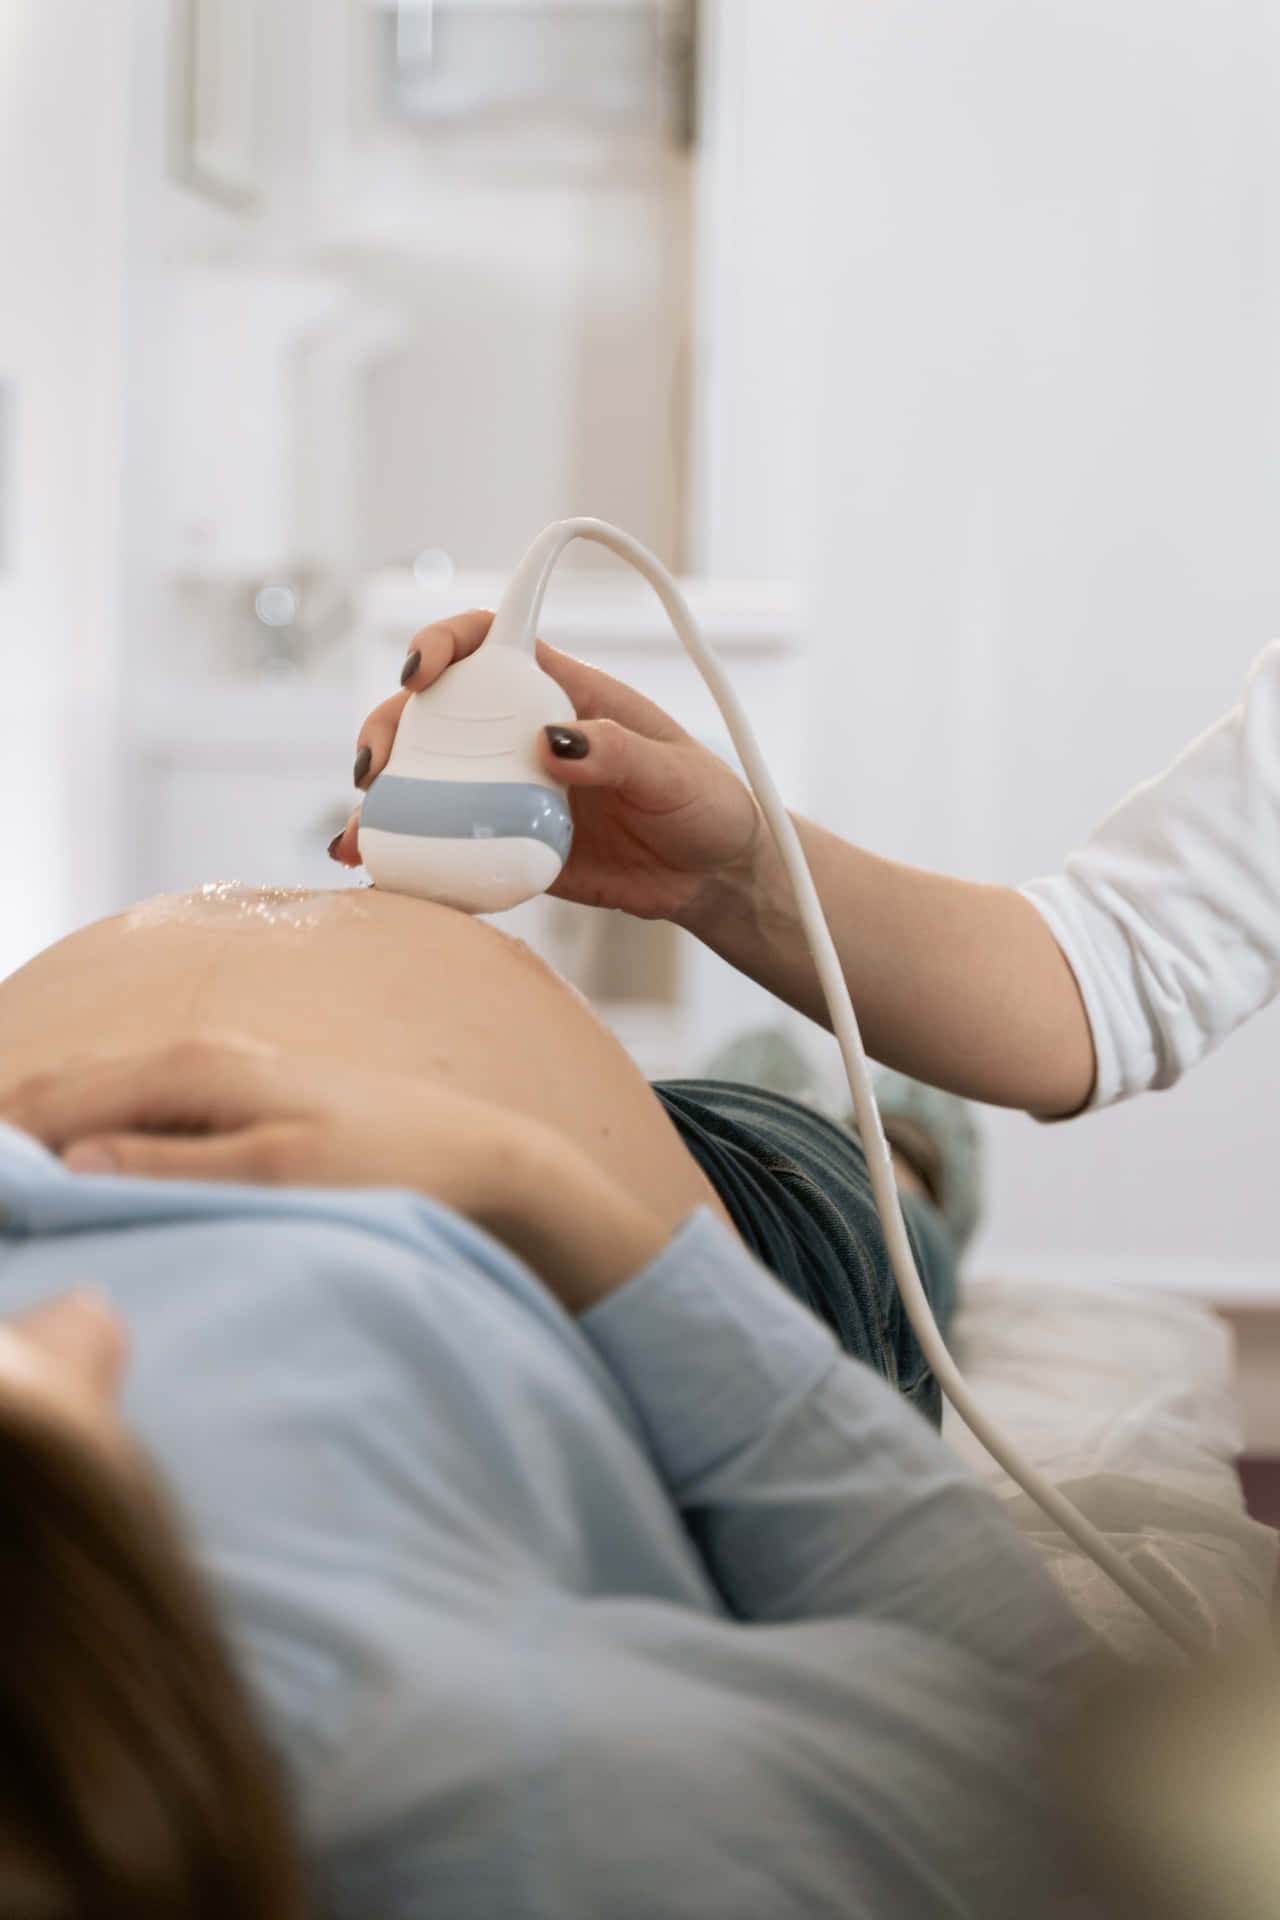 A Woman Is Getting An Ultrasound Treatment